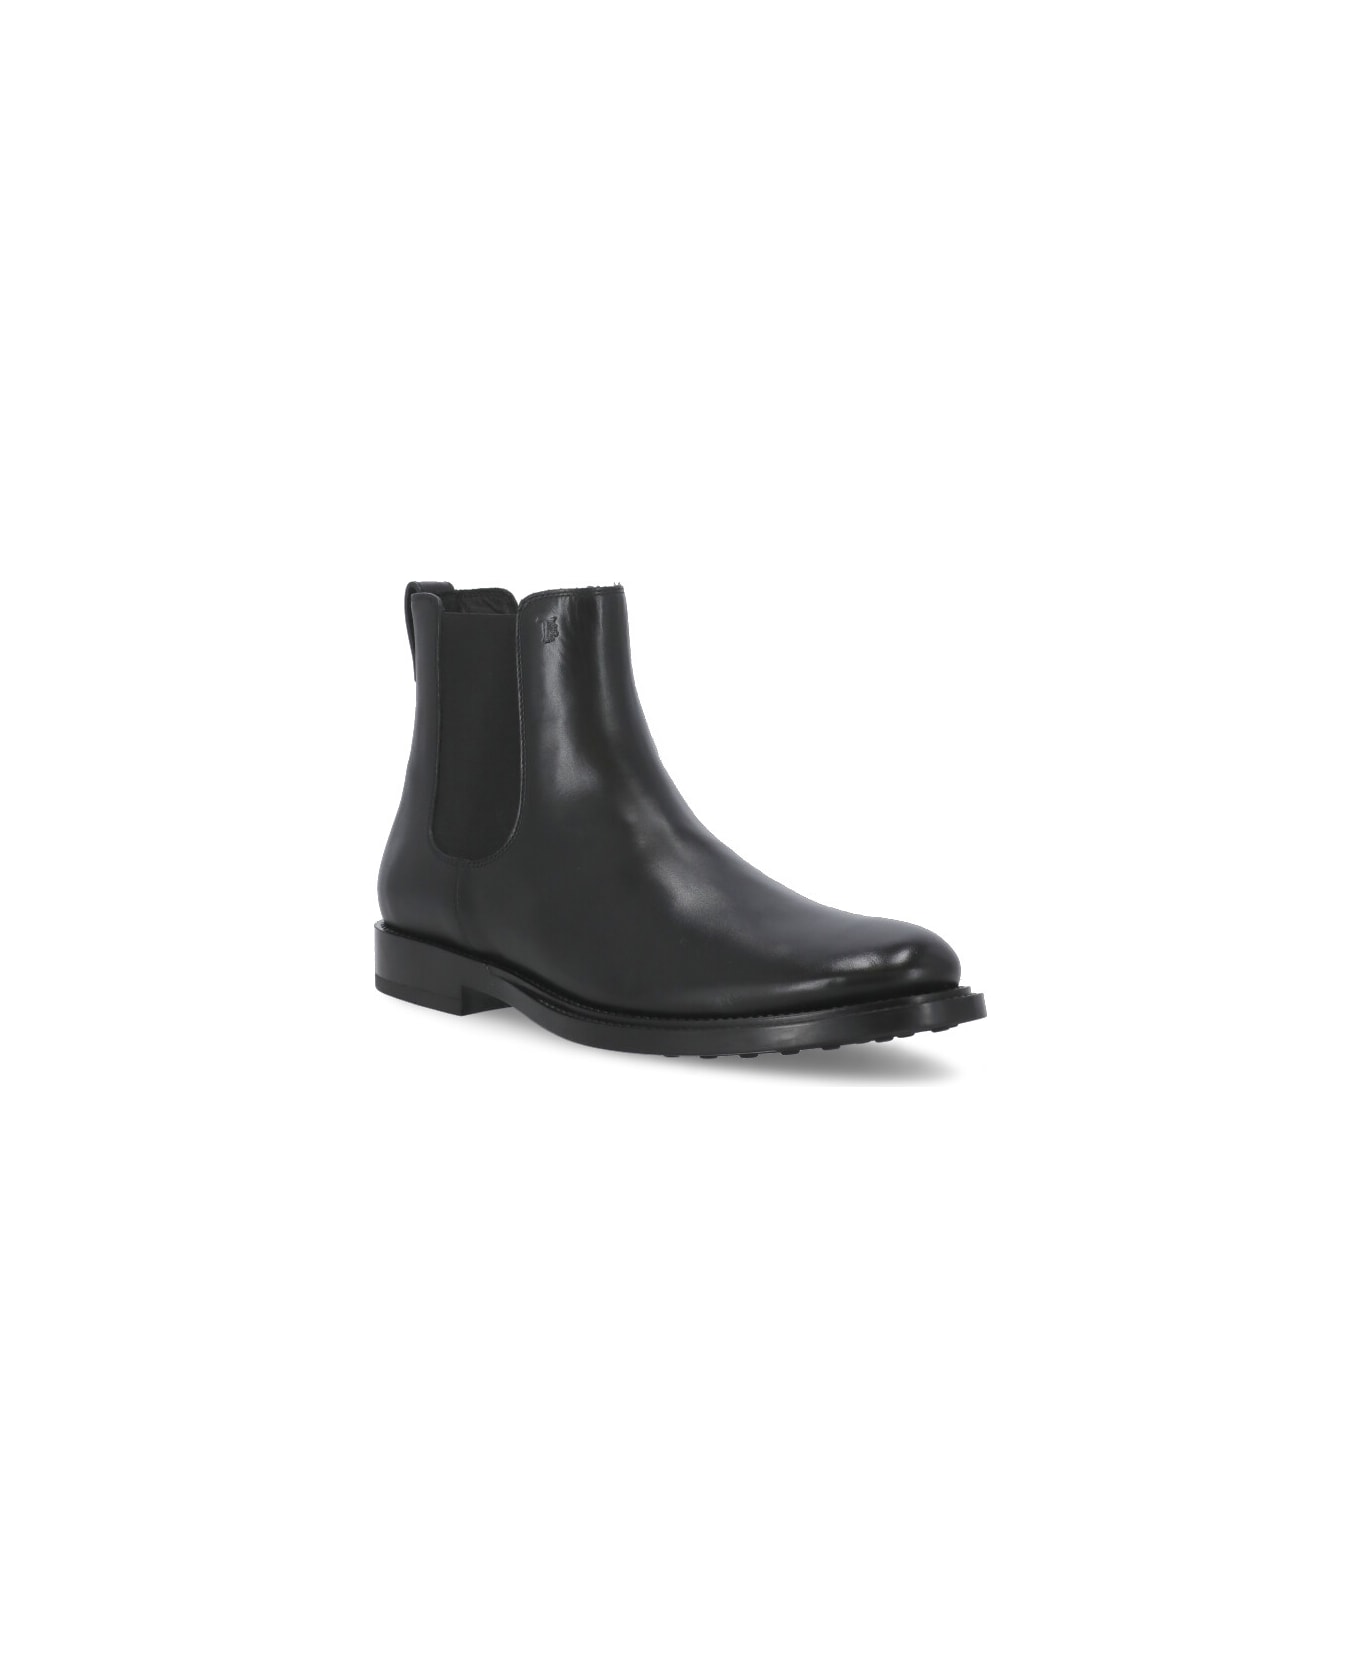 Tod's Suede Leather Chelsea Boots - Black ブーツ